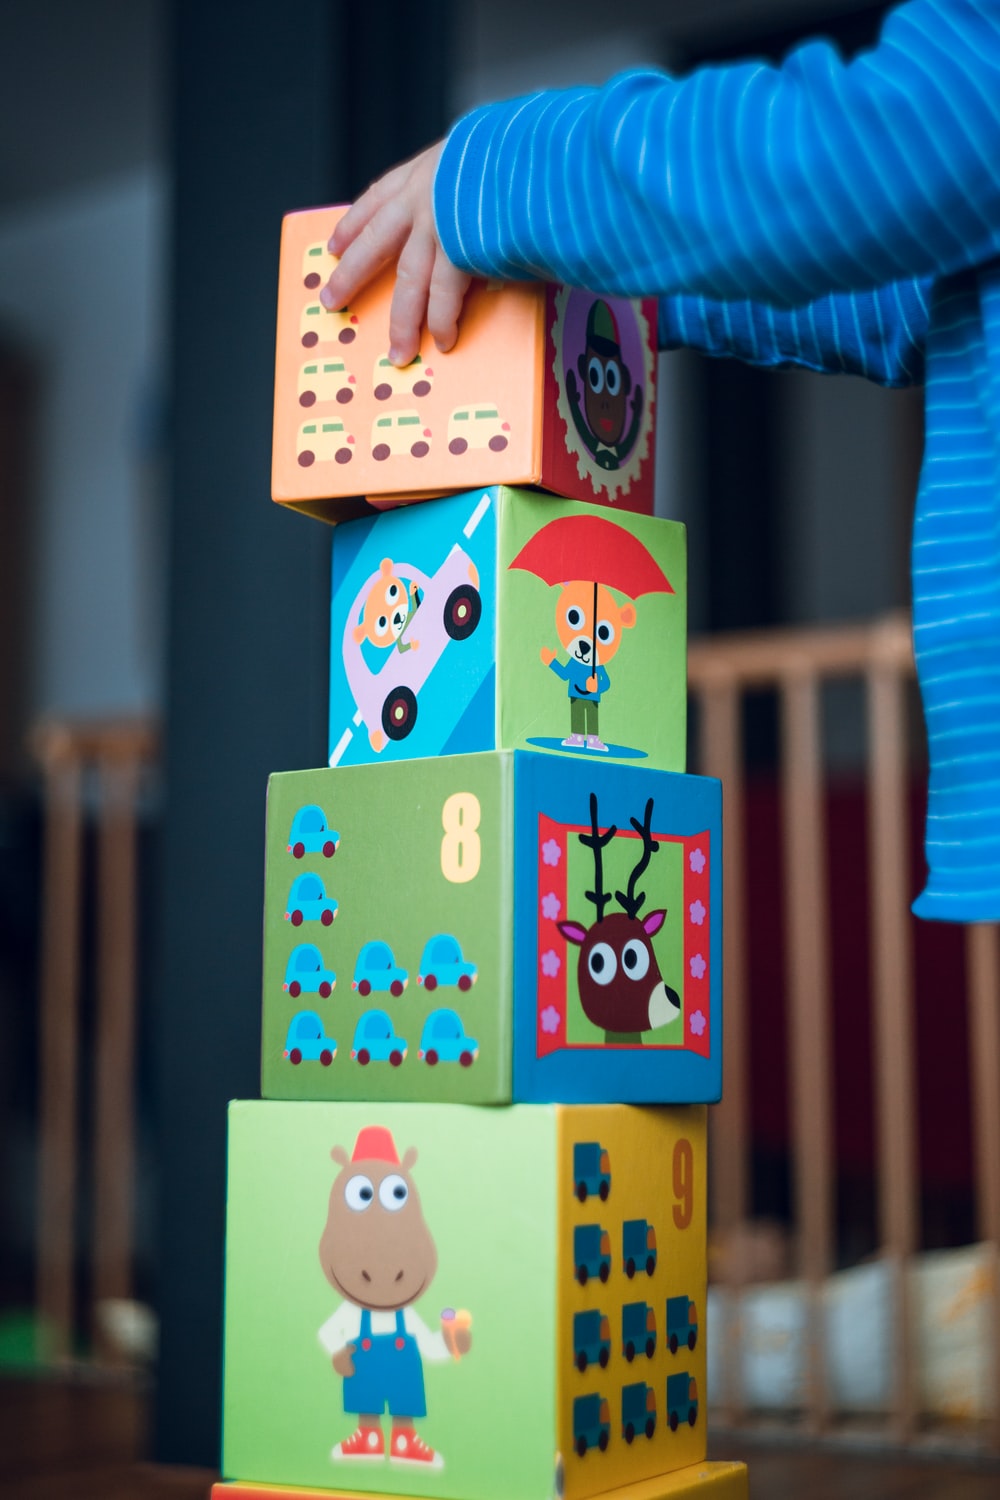 Kids Toys Picture. Download Free Image